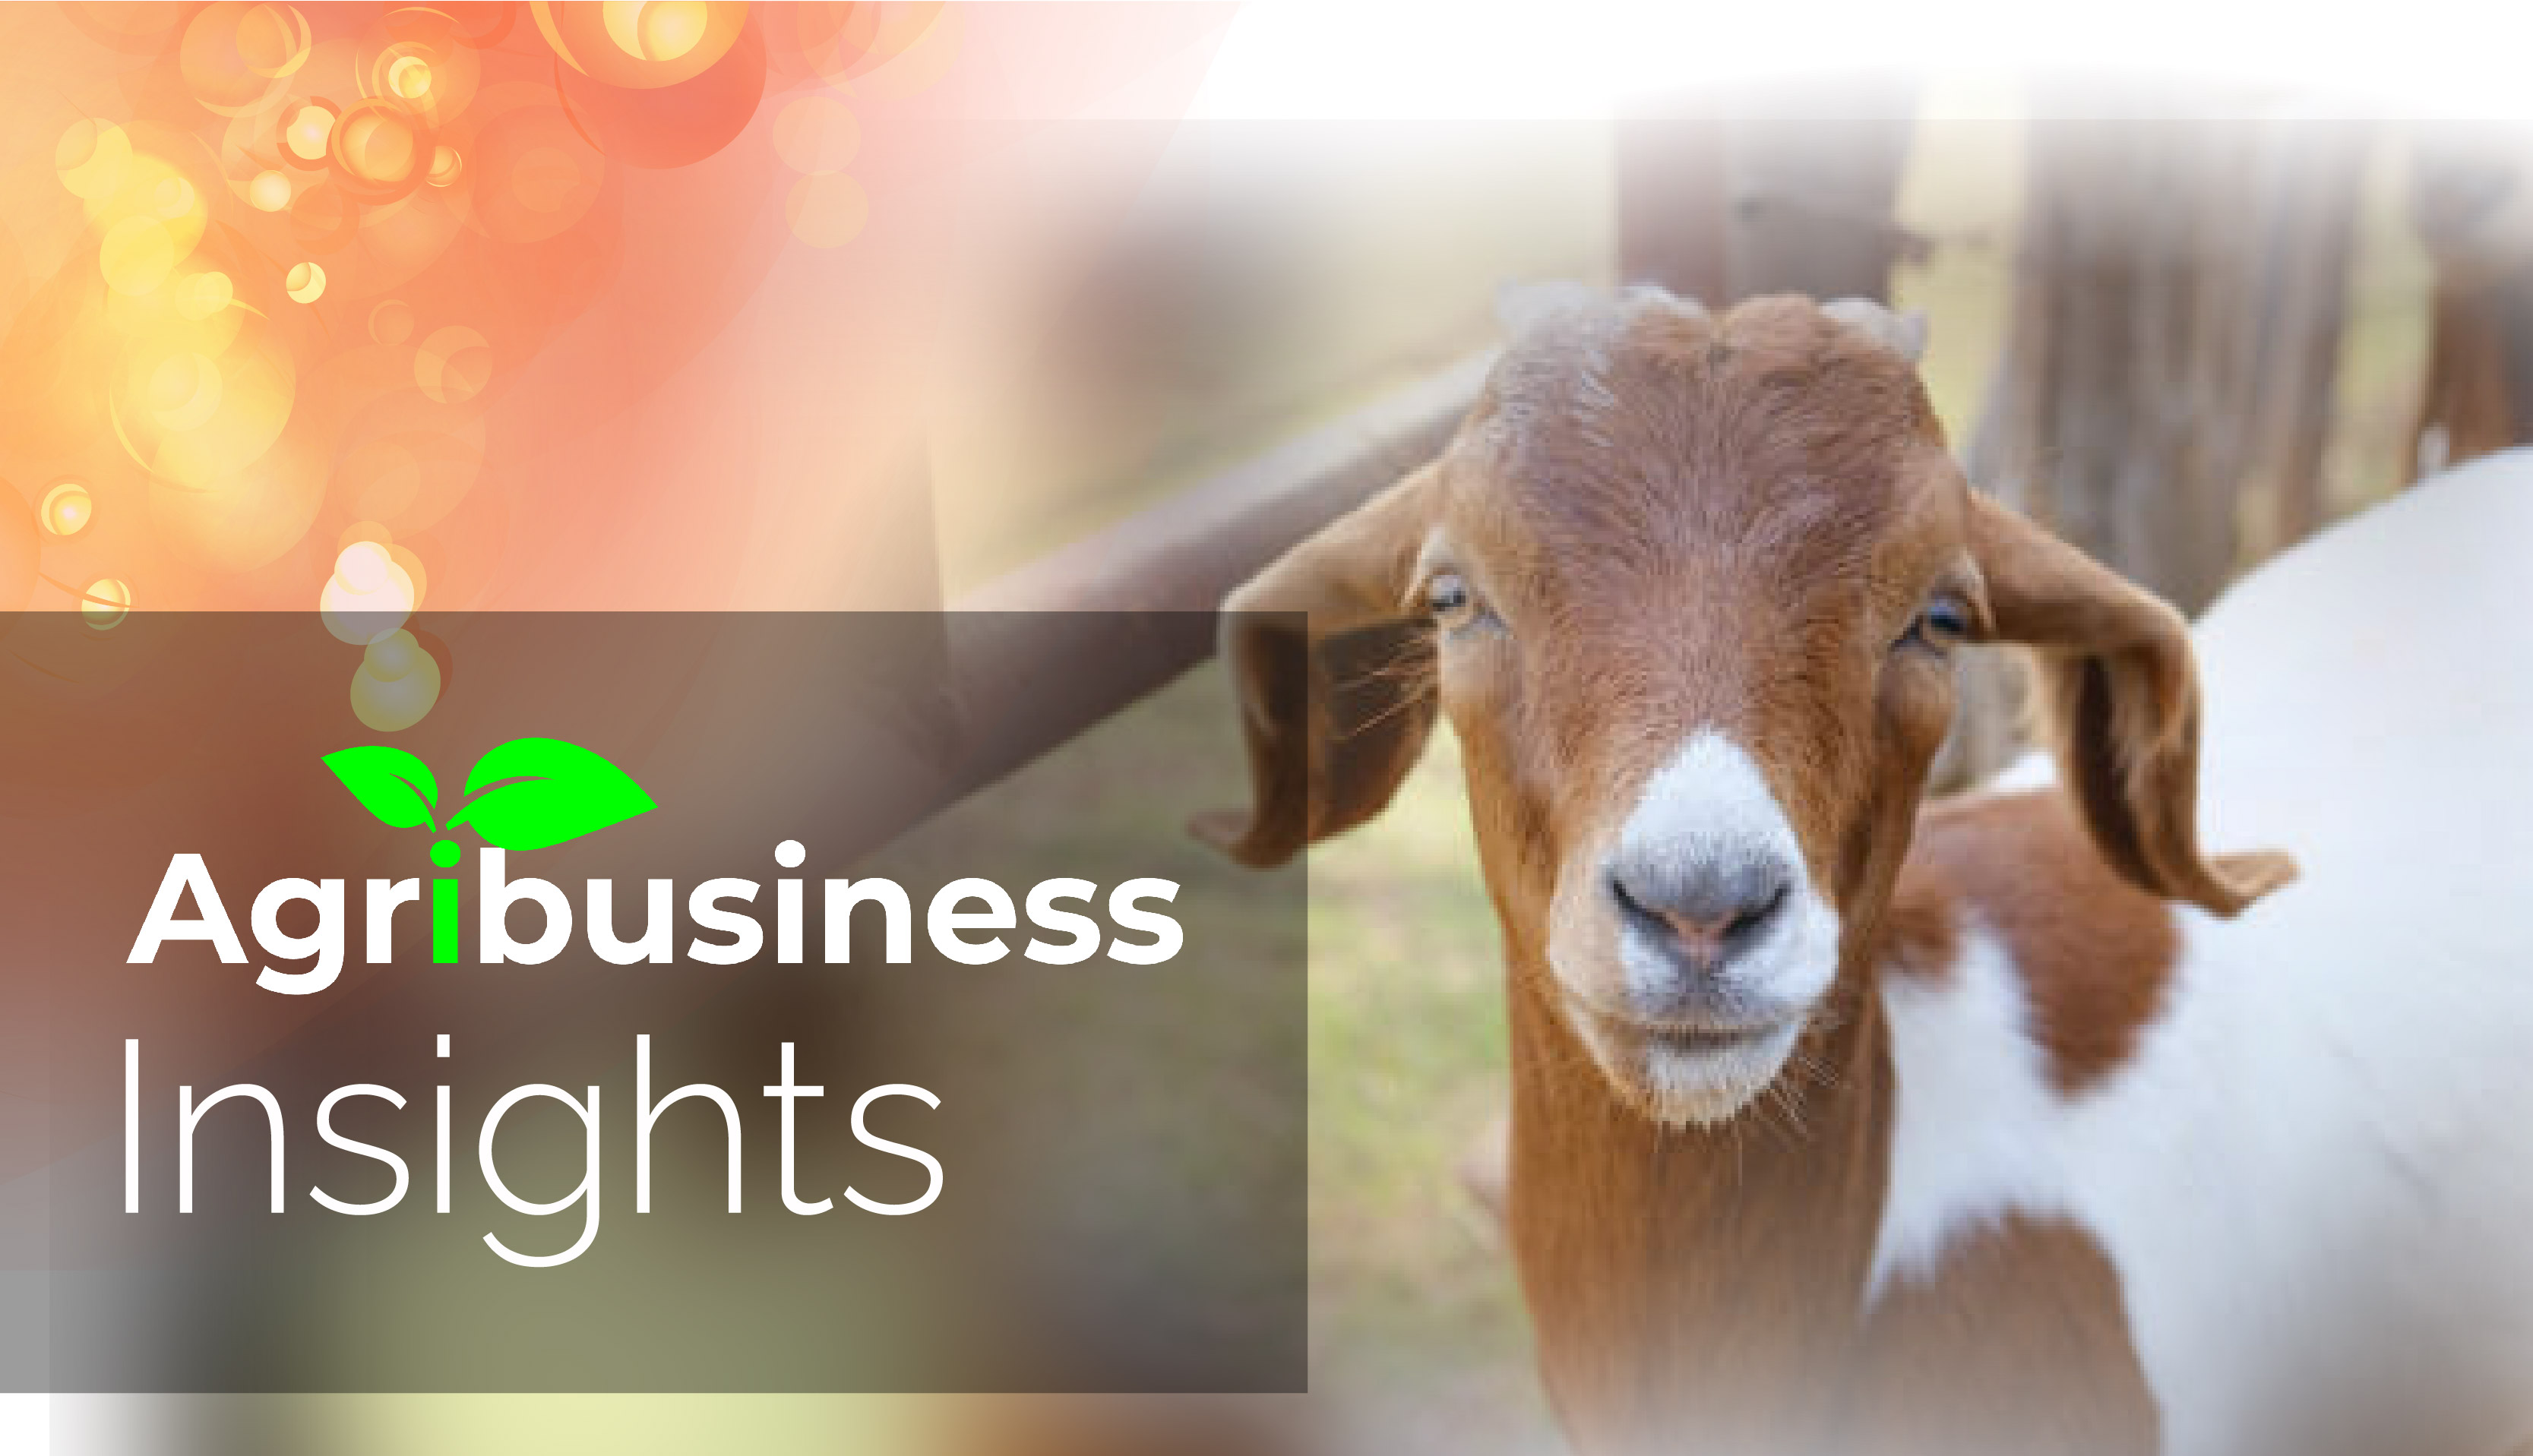 Agribusiness insights (Goat farming)